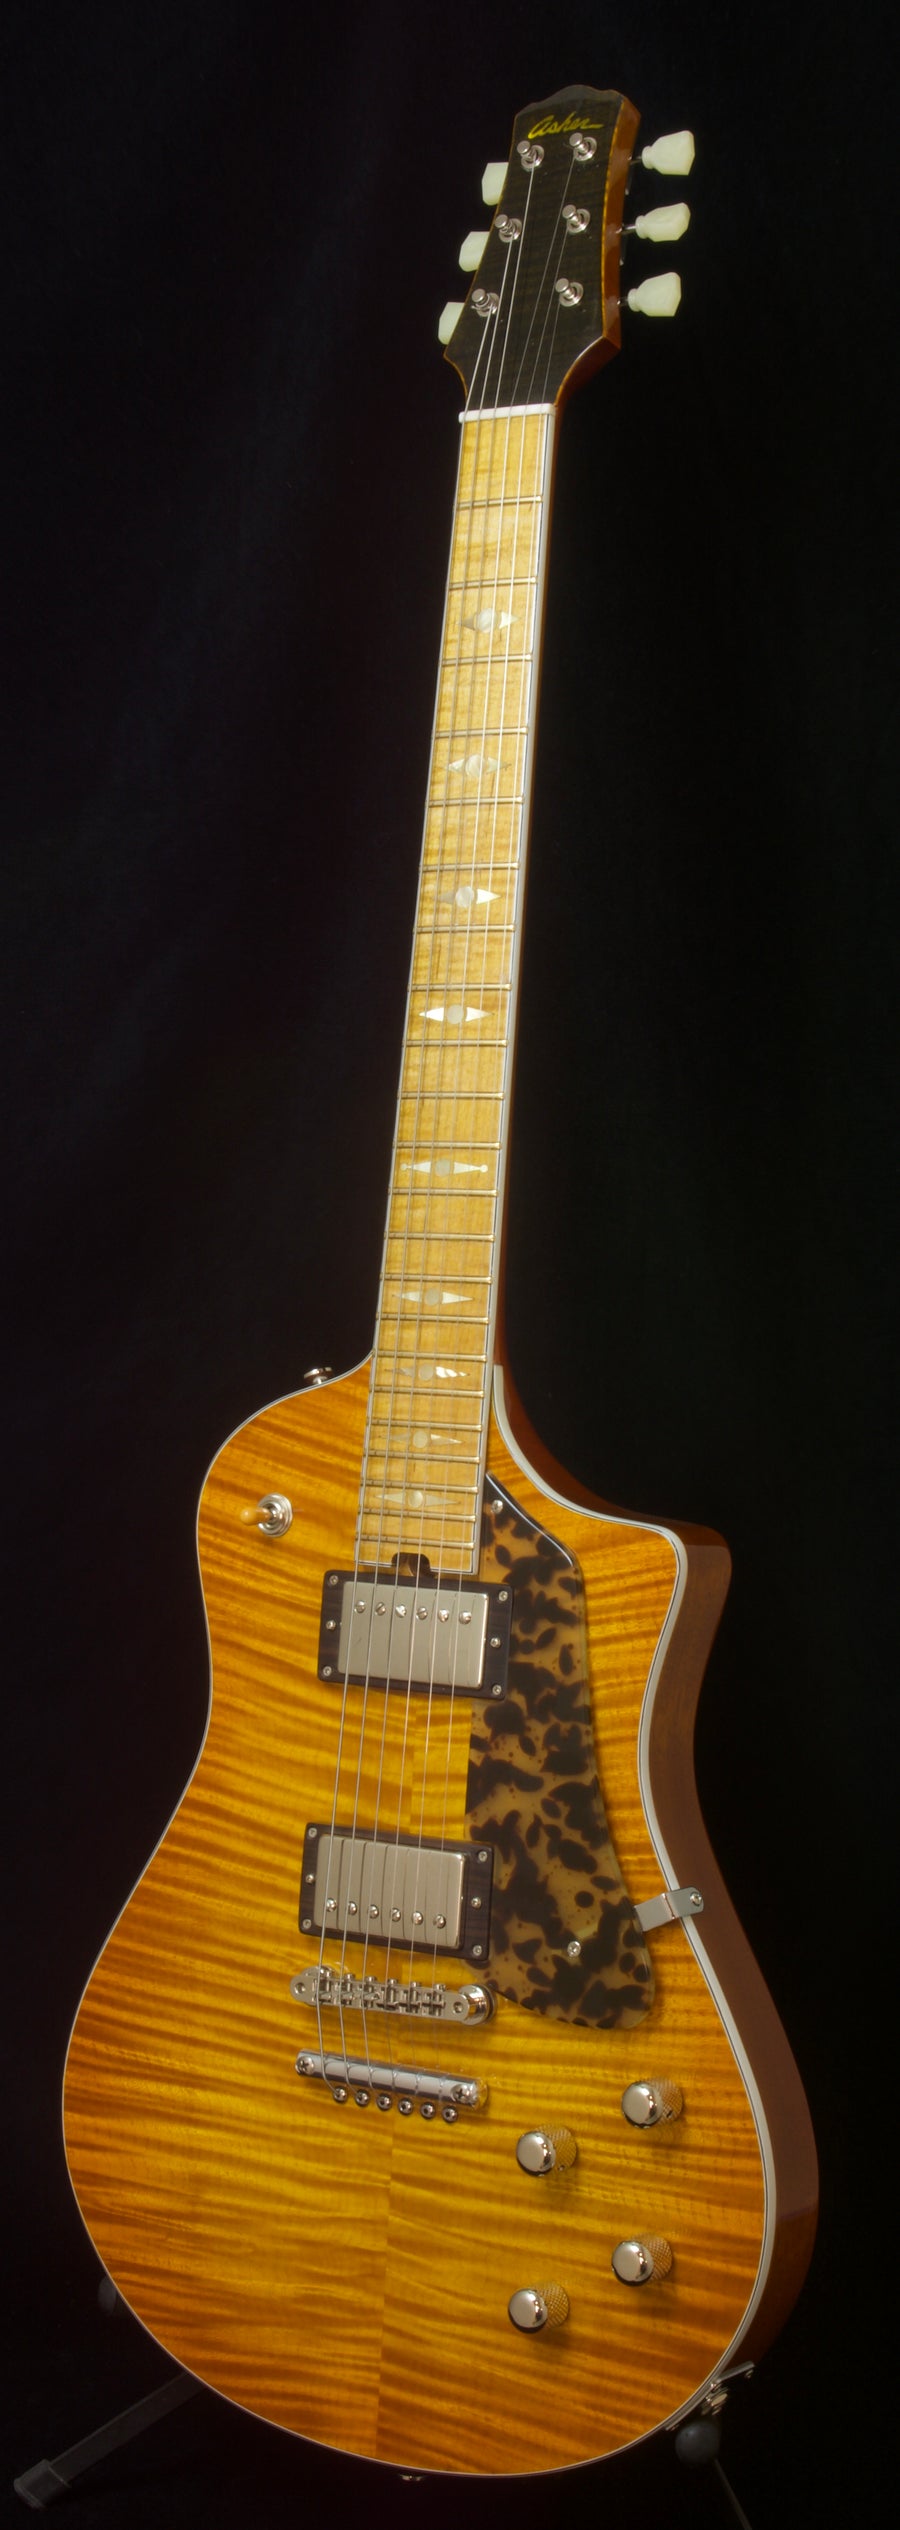 SOLD 2020 Asher Electro Sonic I Flame Maple Top 35th Anniversary Model #12 /35 Limited Edition $6200.00